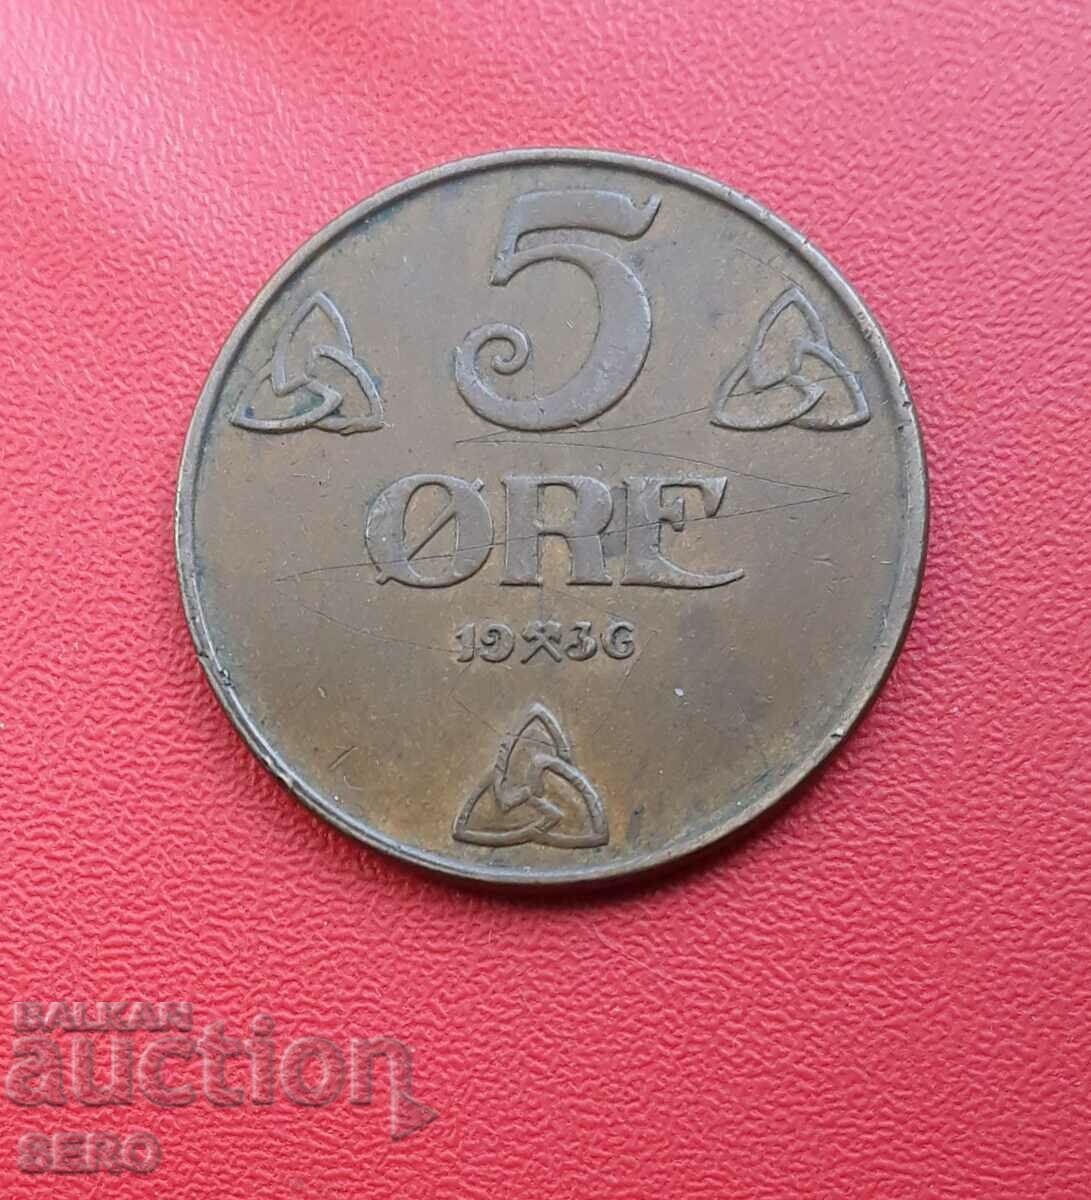 Norway-5 yore 1936-has scratches